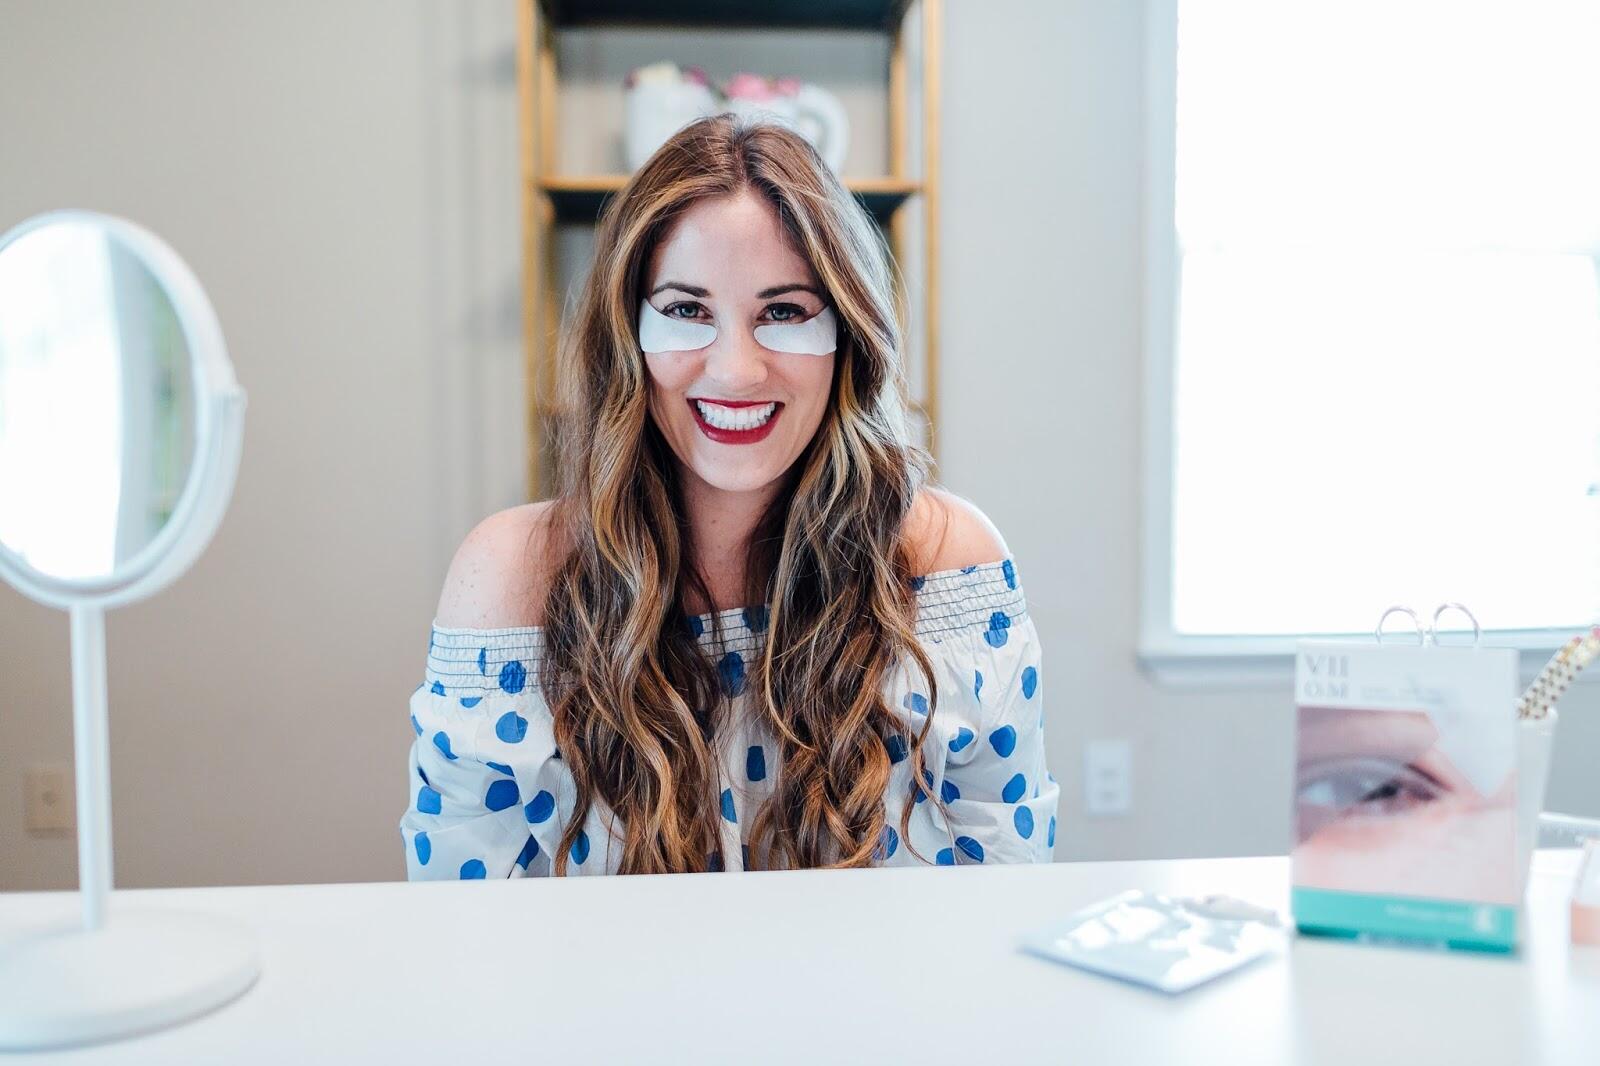 The Eye Mask For Sleeping: The Secrets to Waking up Looking & Feeling Refreshed by fashion blogger Laura from Walking in Memphis in High Heels